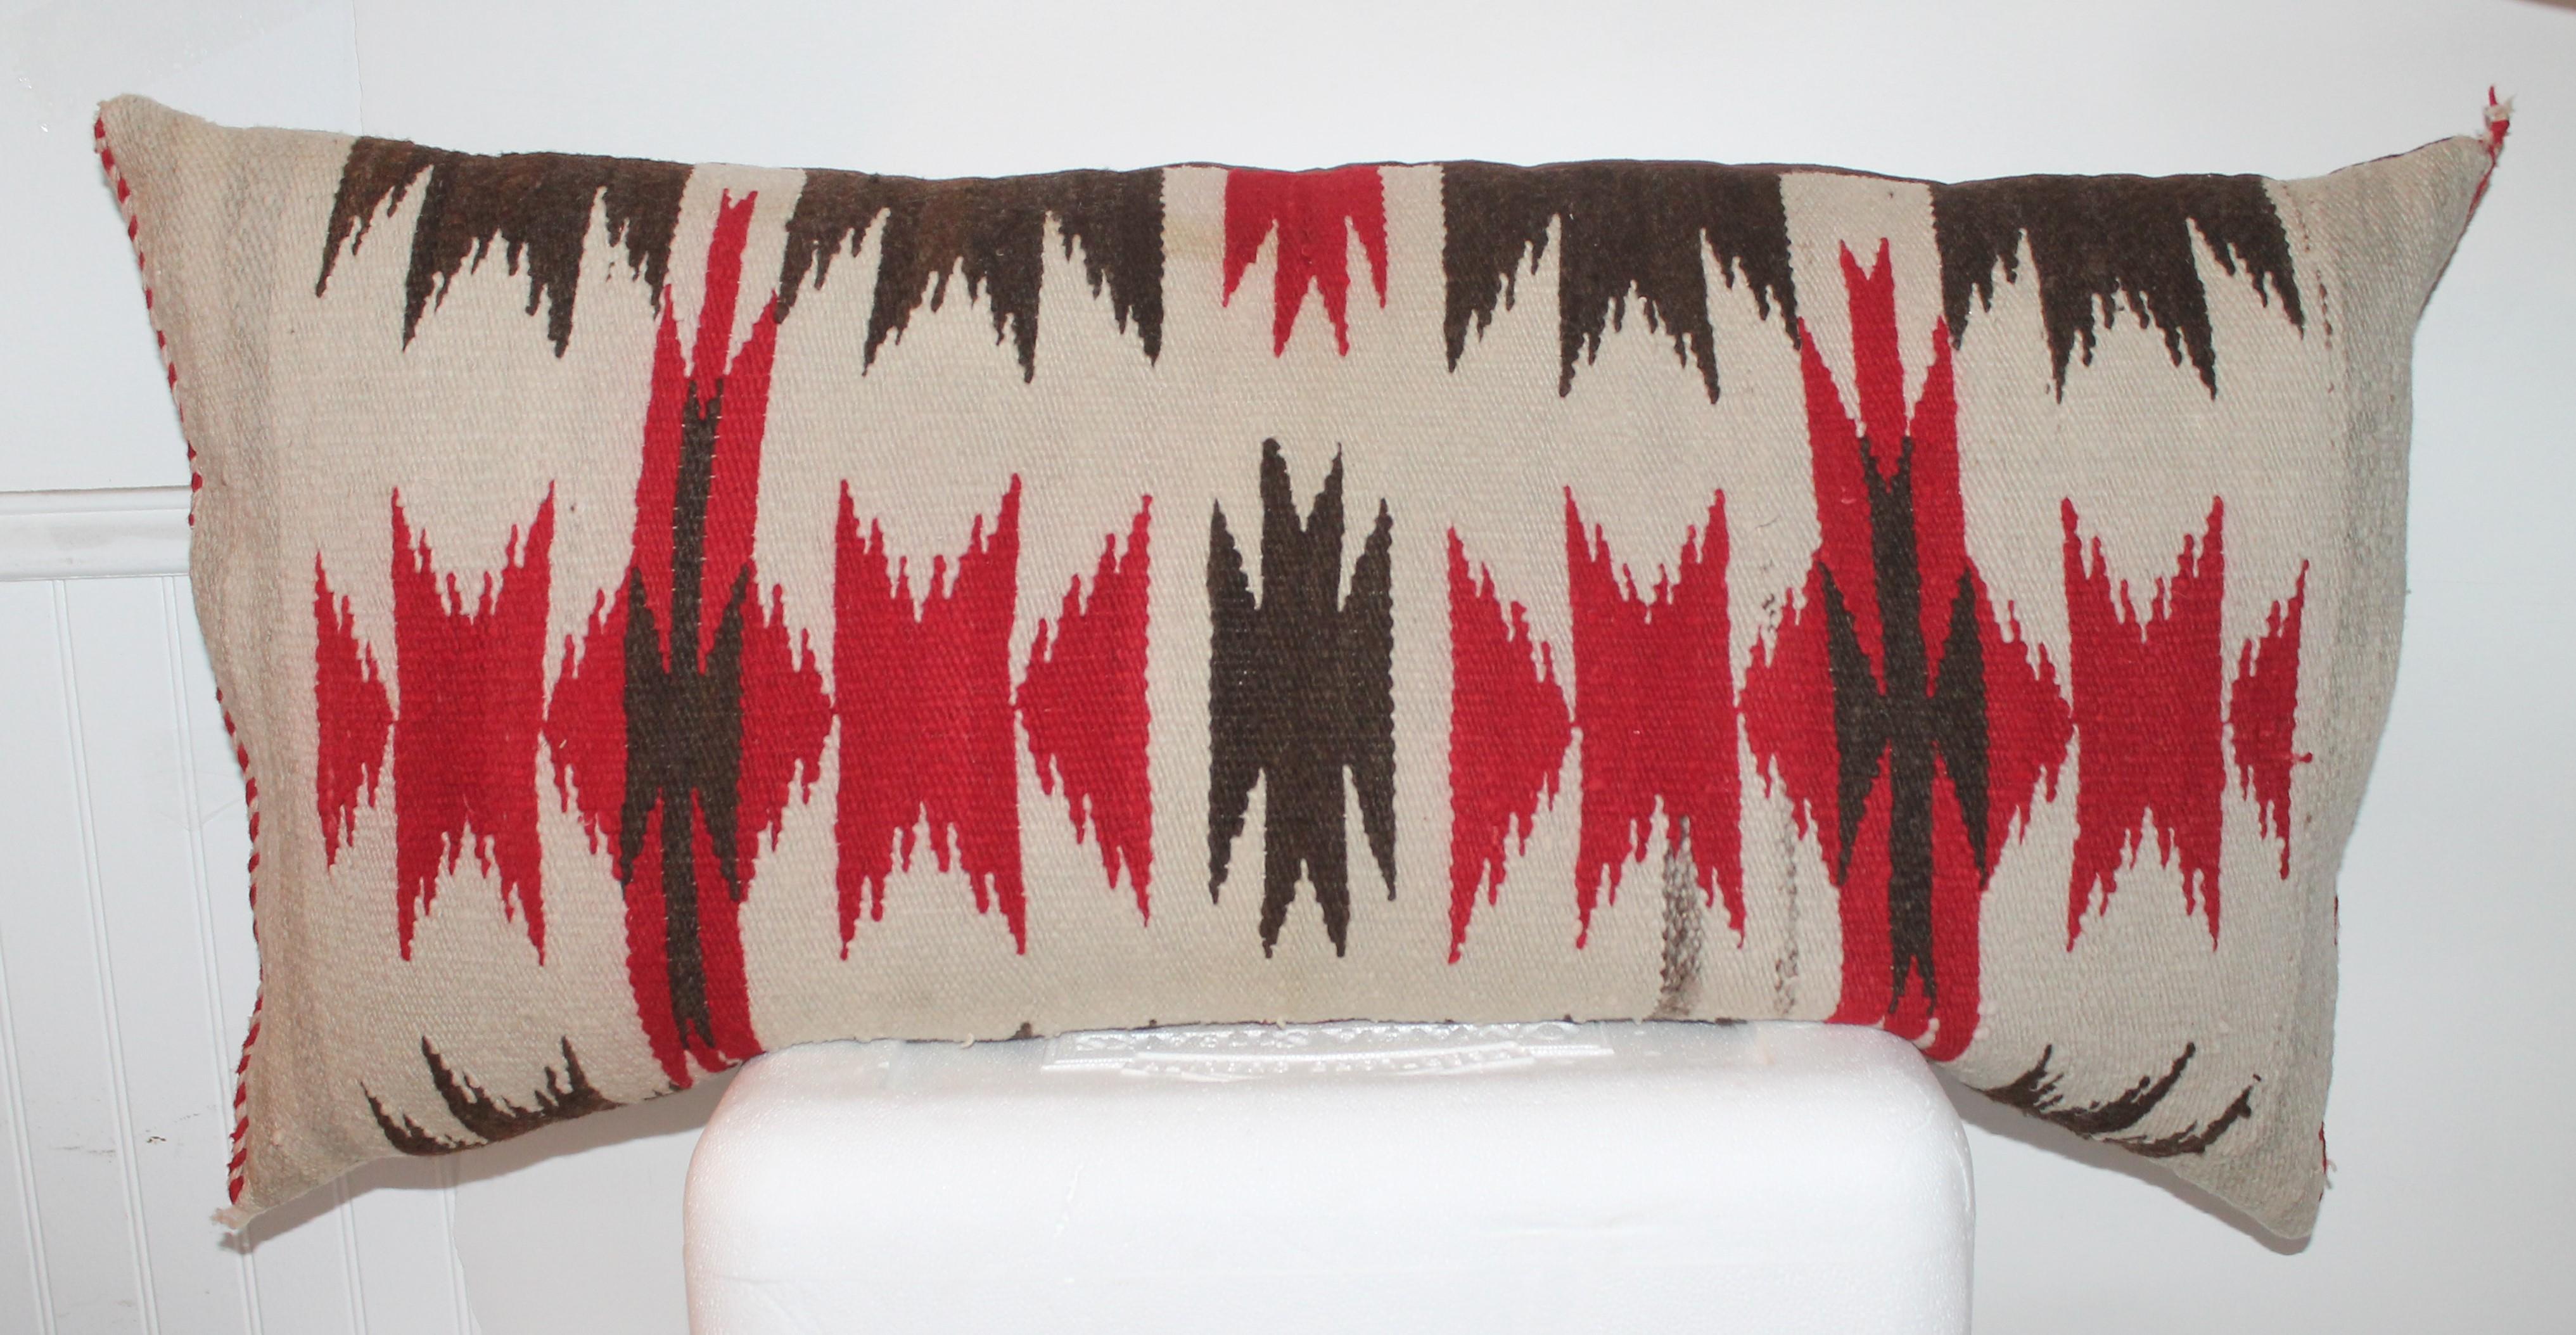 These three Navajo weaving saddle blanket bolster pillows are in pristine condition and all have very similar colors.
Sold individual @ $ 895.00 per pillow or $ 2295.00 for the three bolsters.
Largest pillow measures: 38 x 20 inches
both smaller